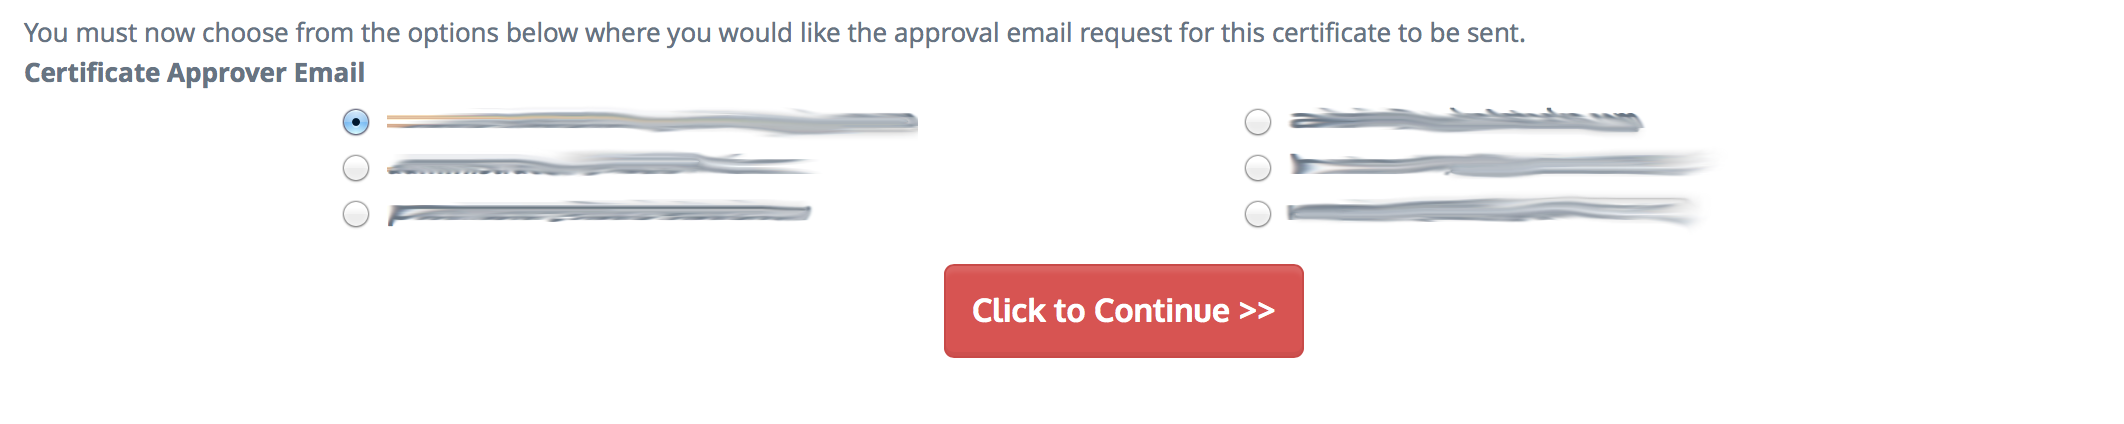 Choosing an admin email to approve the certificate